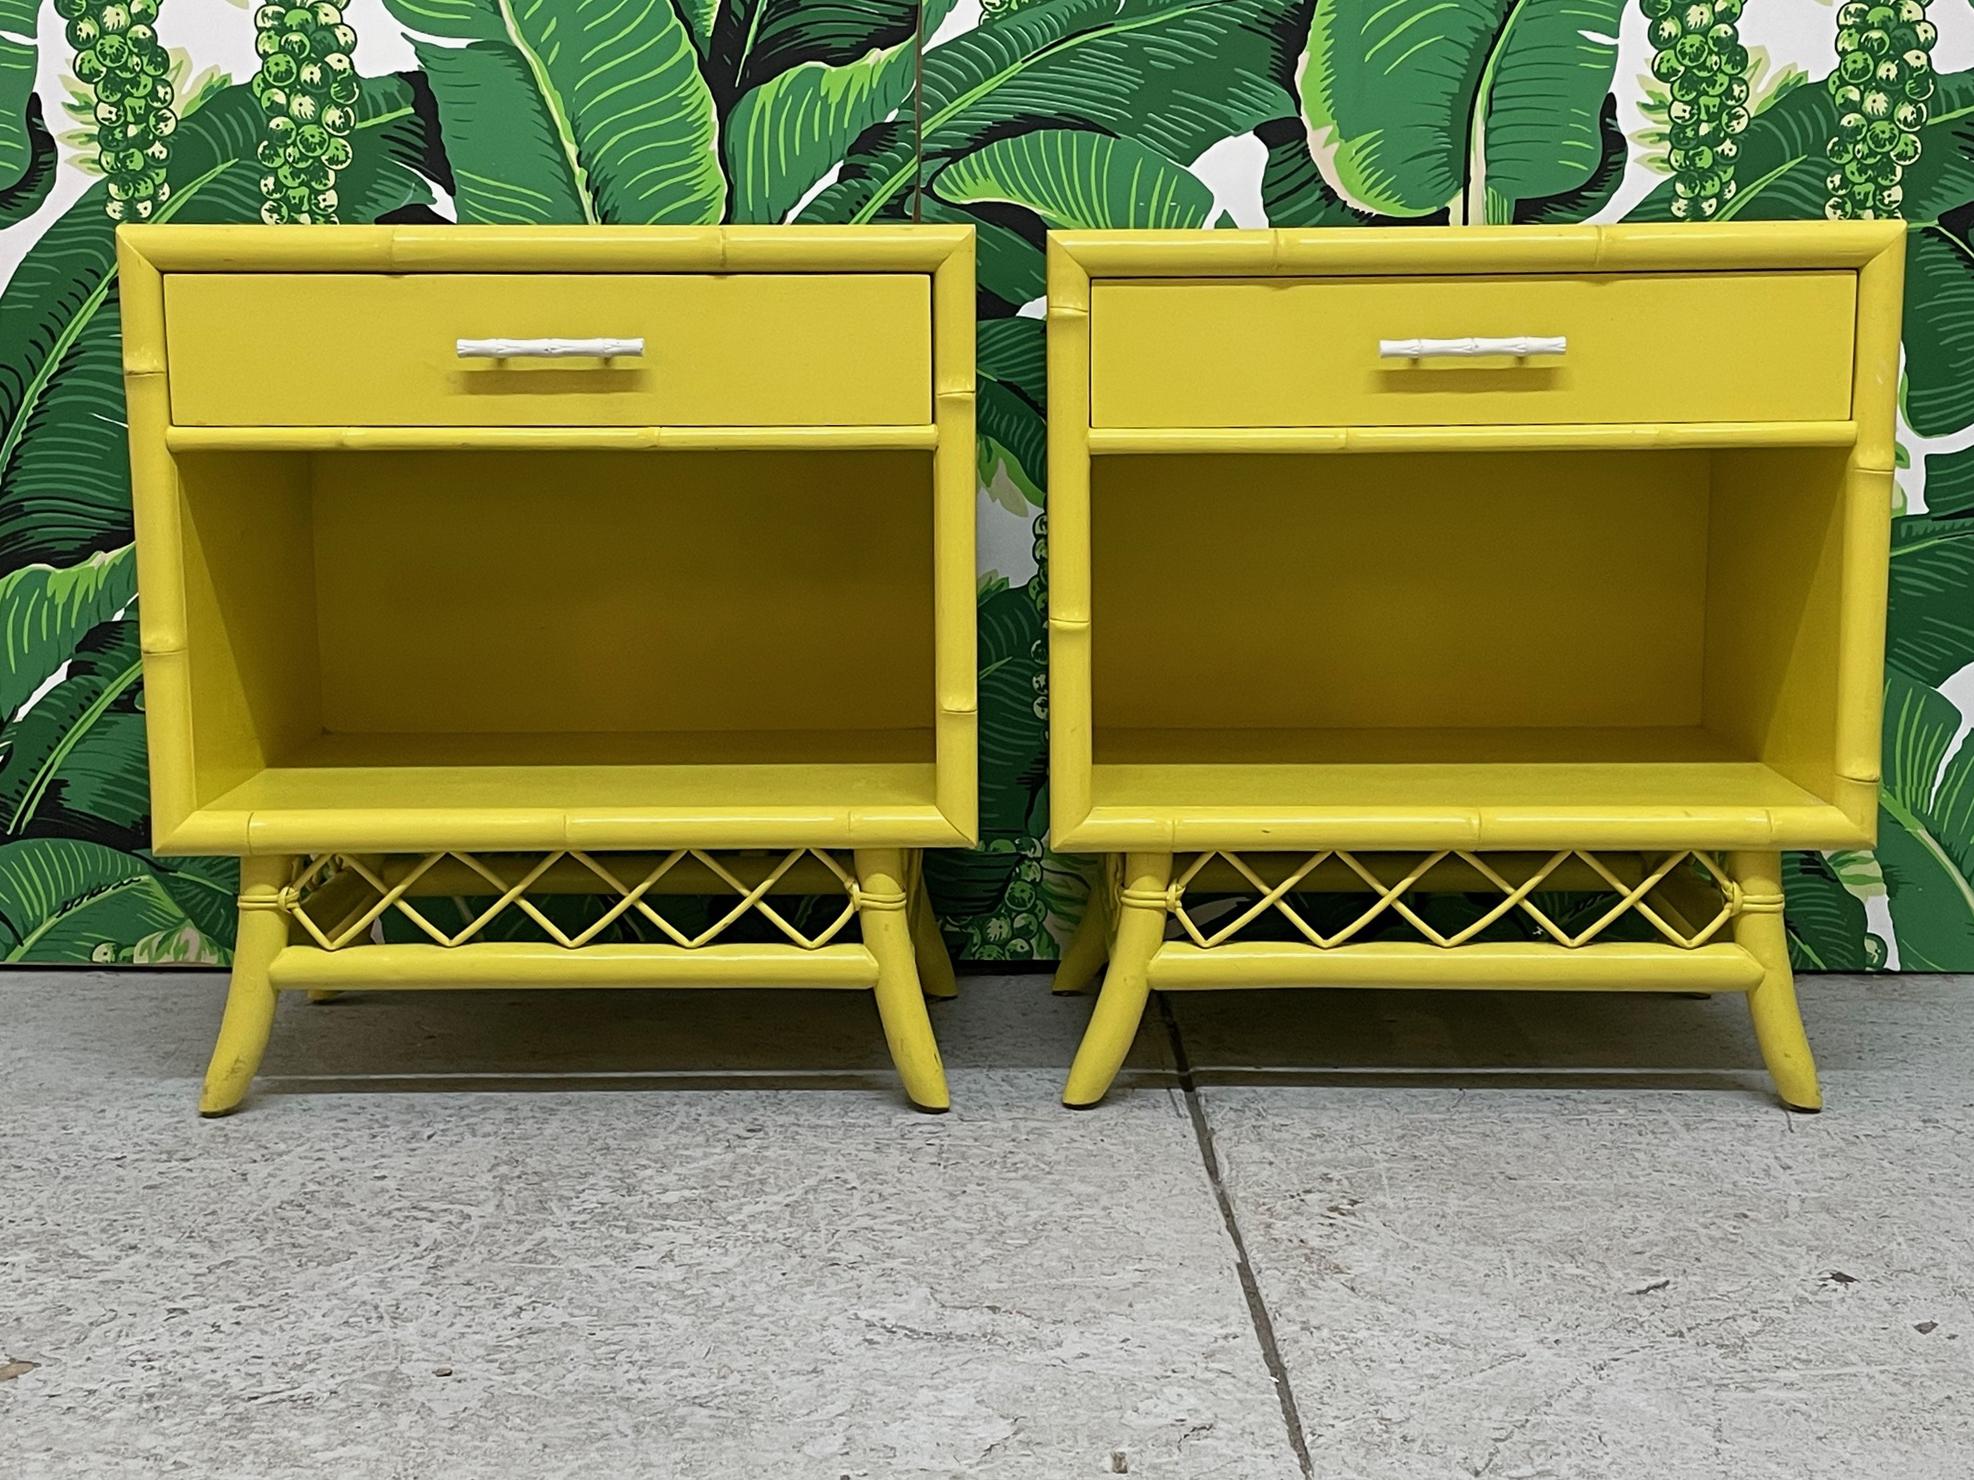 Pair of vintage faux bamboo nightstands feature rattan fretwork and splayed legs. Bright yellow lacquered finish. Good condition with minor imperfections consistent with age.